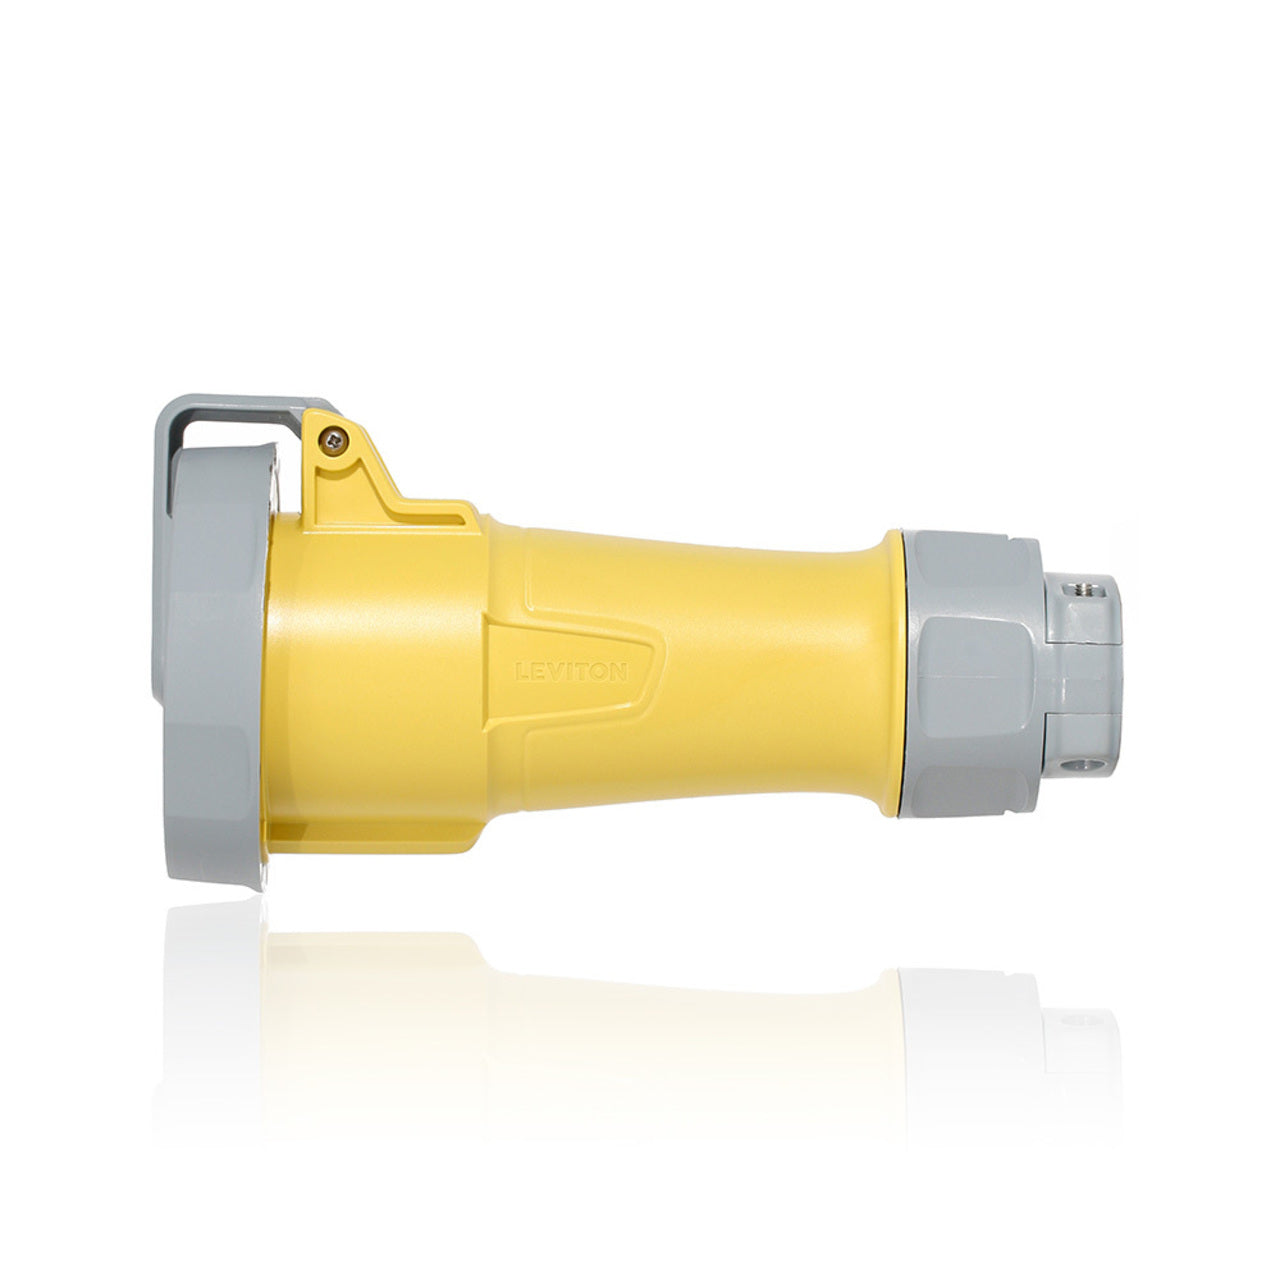 125 Volt, Connector, Yellow By Leviton 330C4WLEV